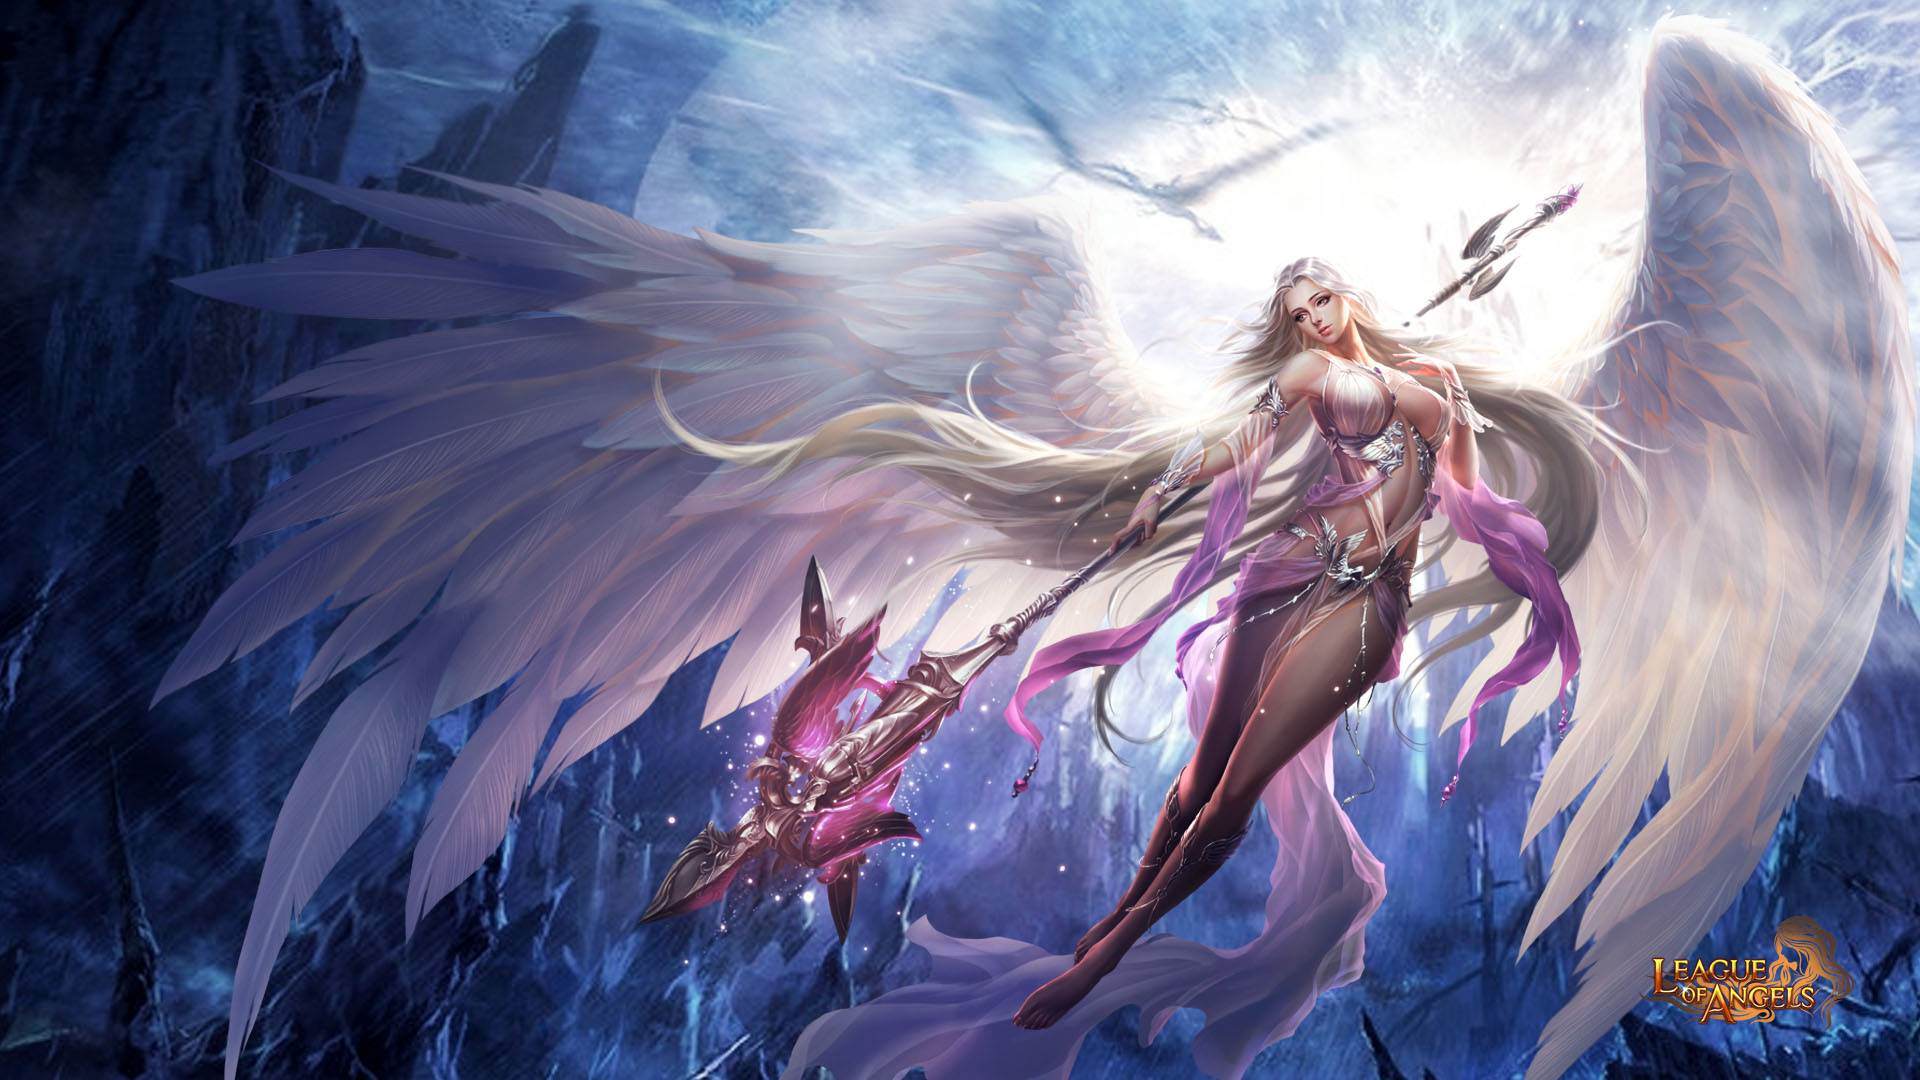 League of Angels Wallpaper in F2P.com and all the information